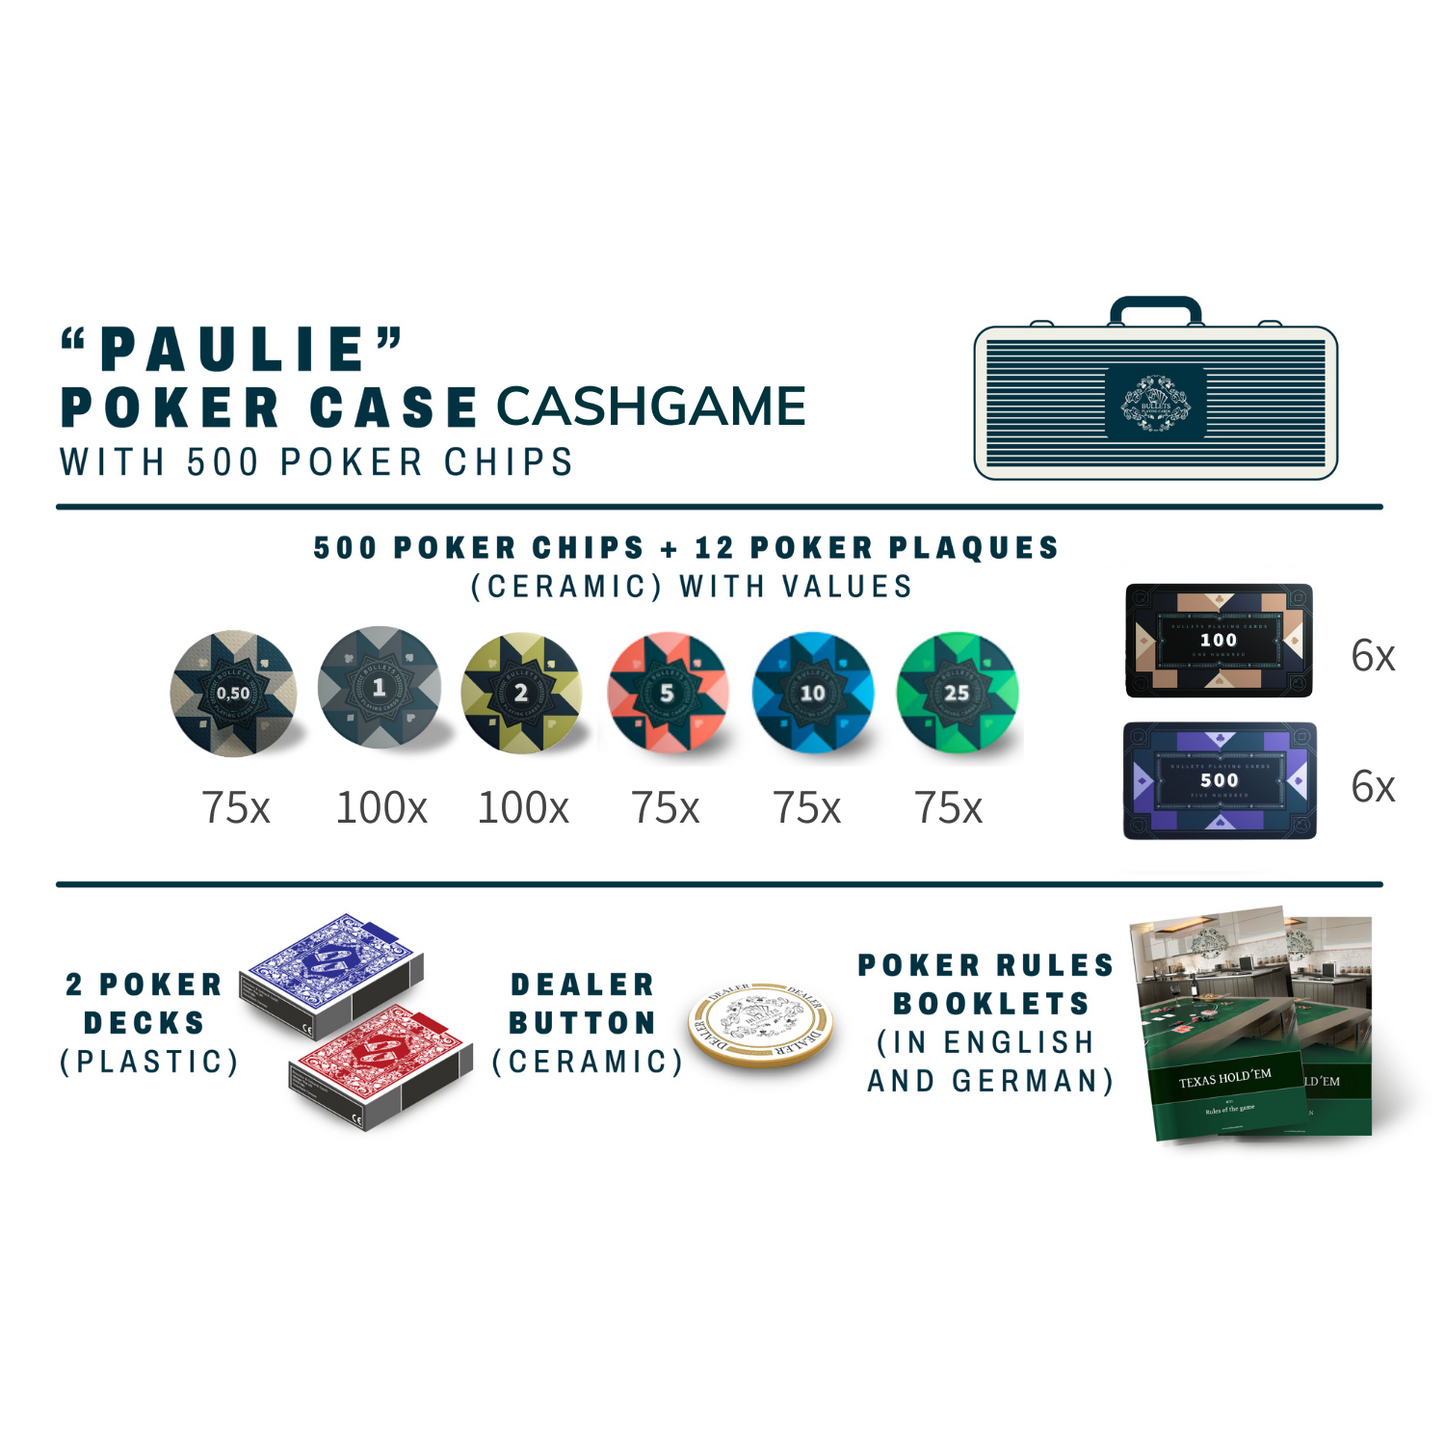 Poker case with 500 ceramic poker chips "Paulie" with values ​​- CASHGAME